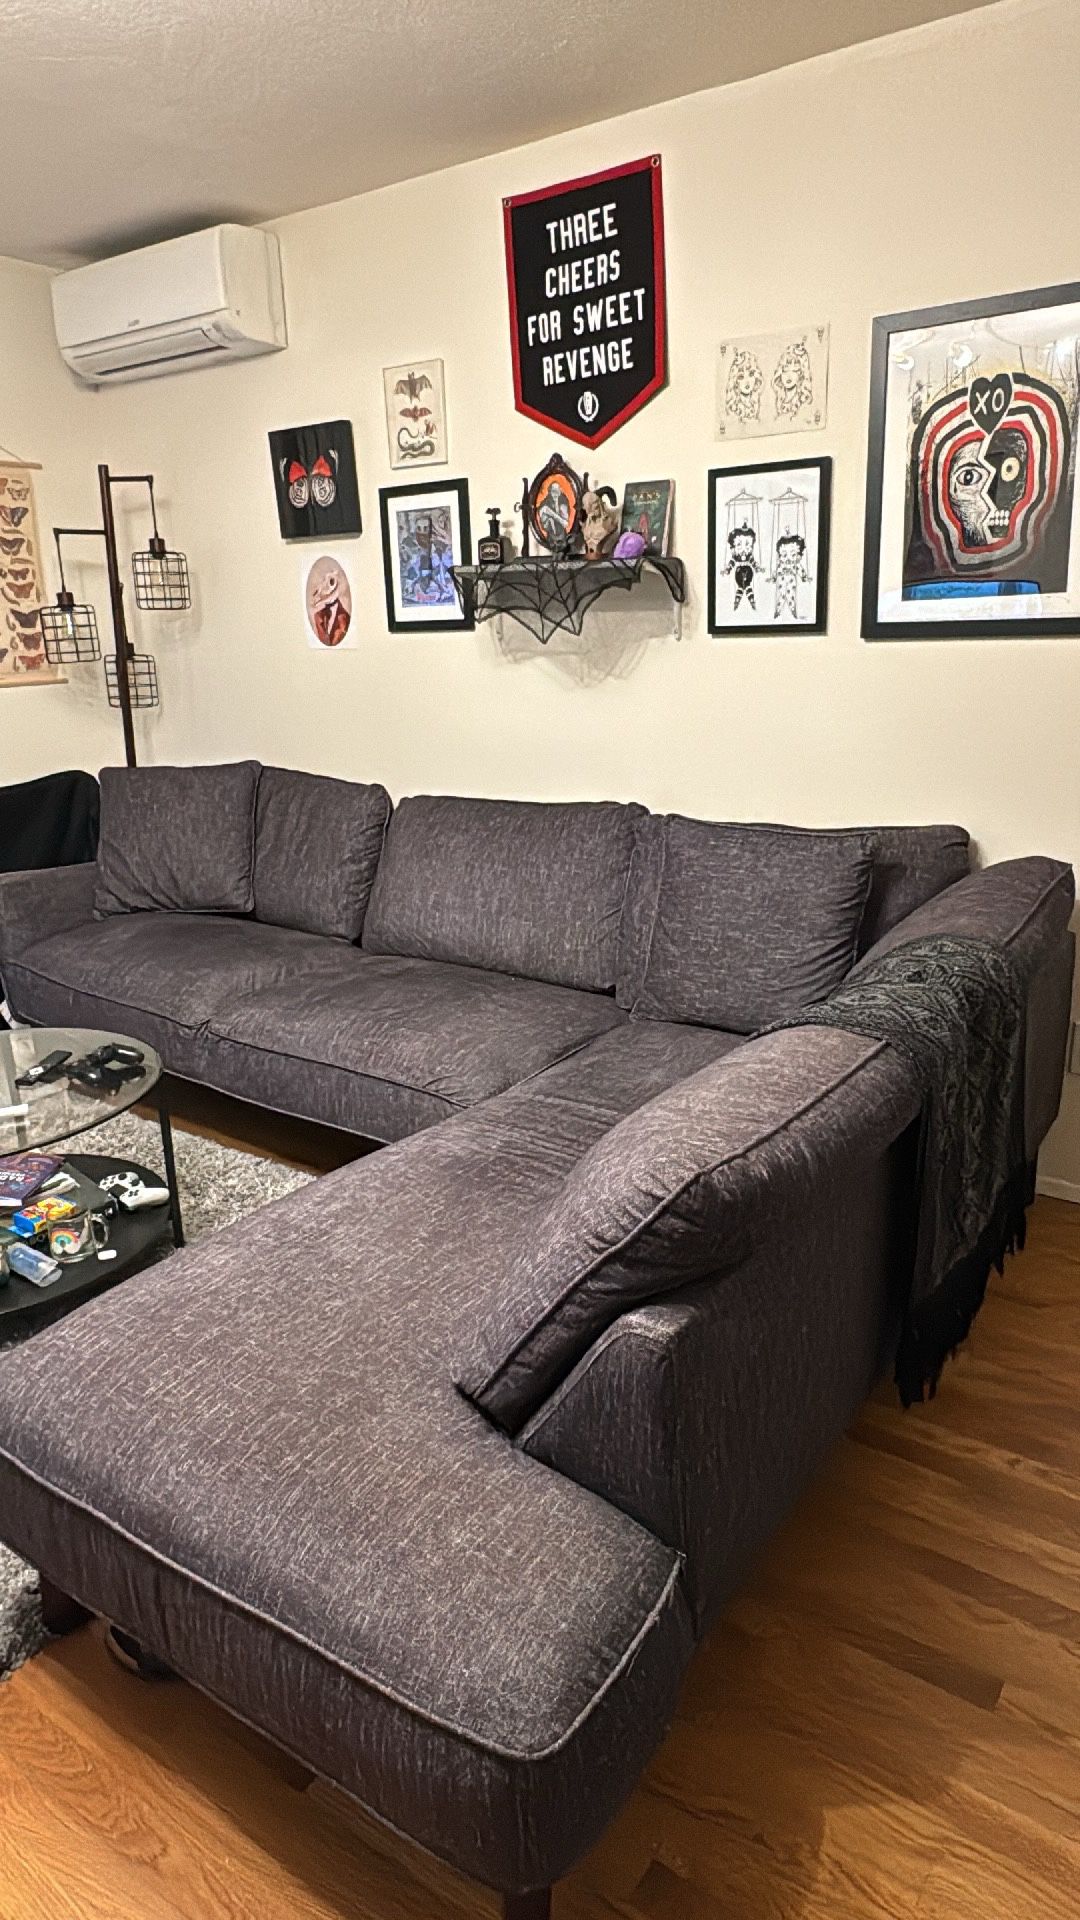 Modern sectional couch